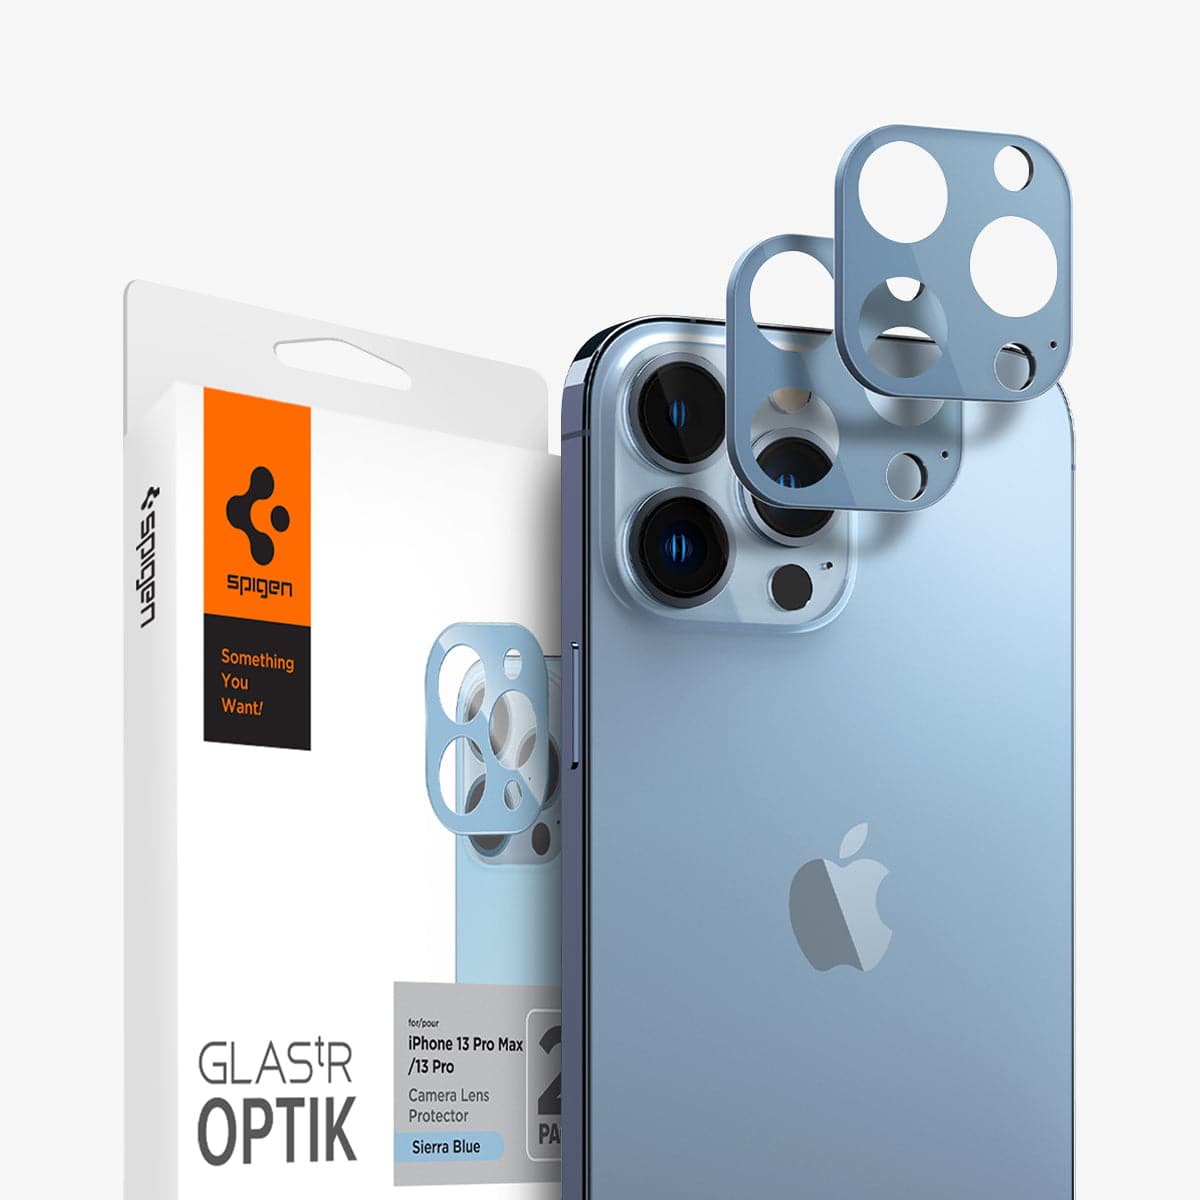 AGL04032 - iPhone 13 Pro Max / iPhone 13 Pro Optik Lens Protector in sierra blue showing the packaging, device and two lens protectors